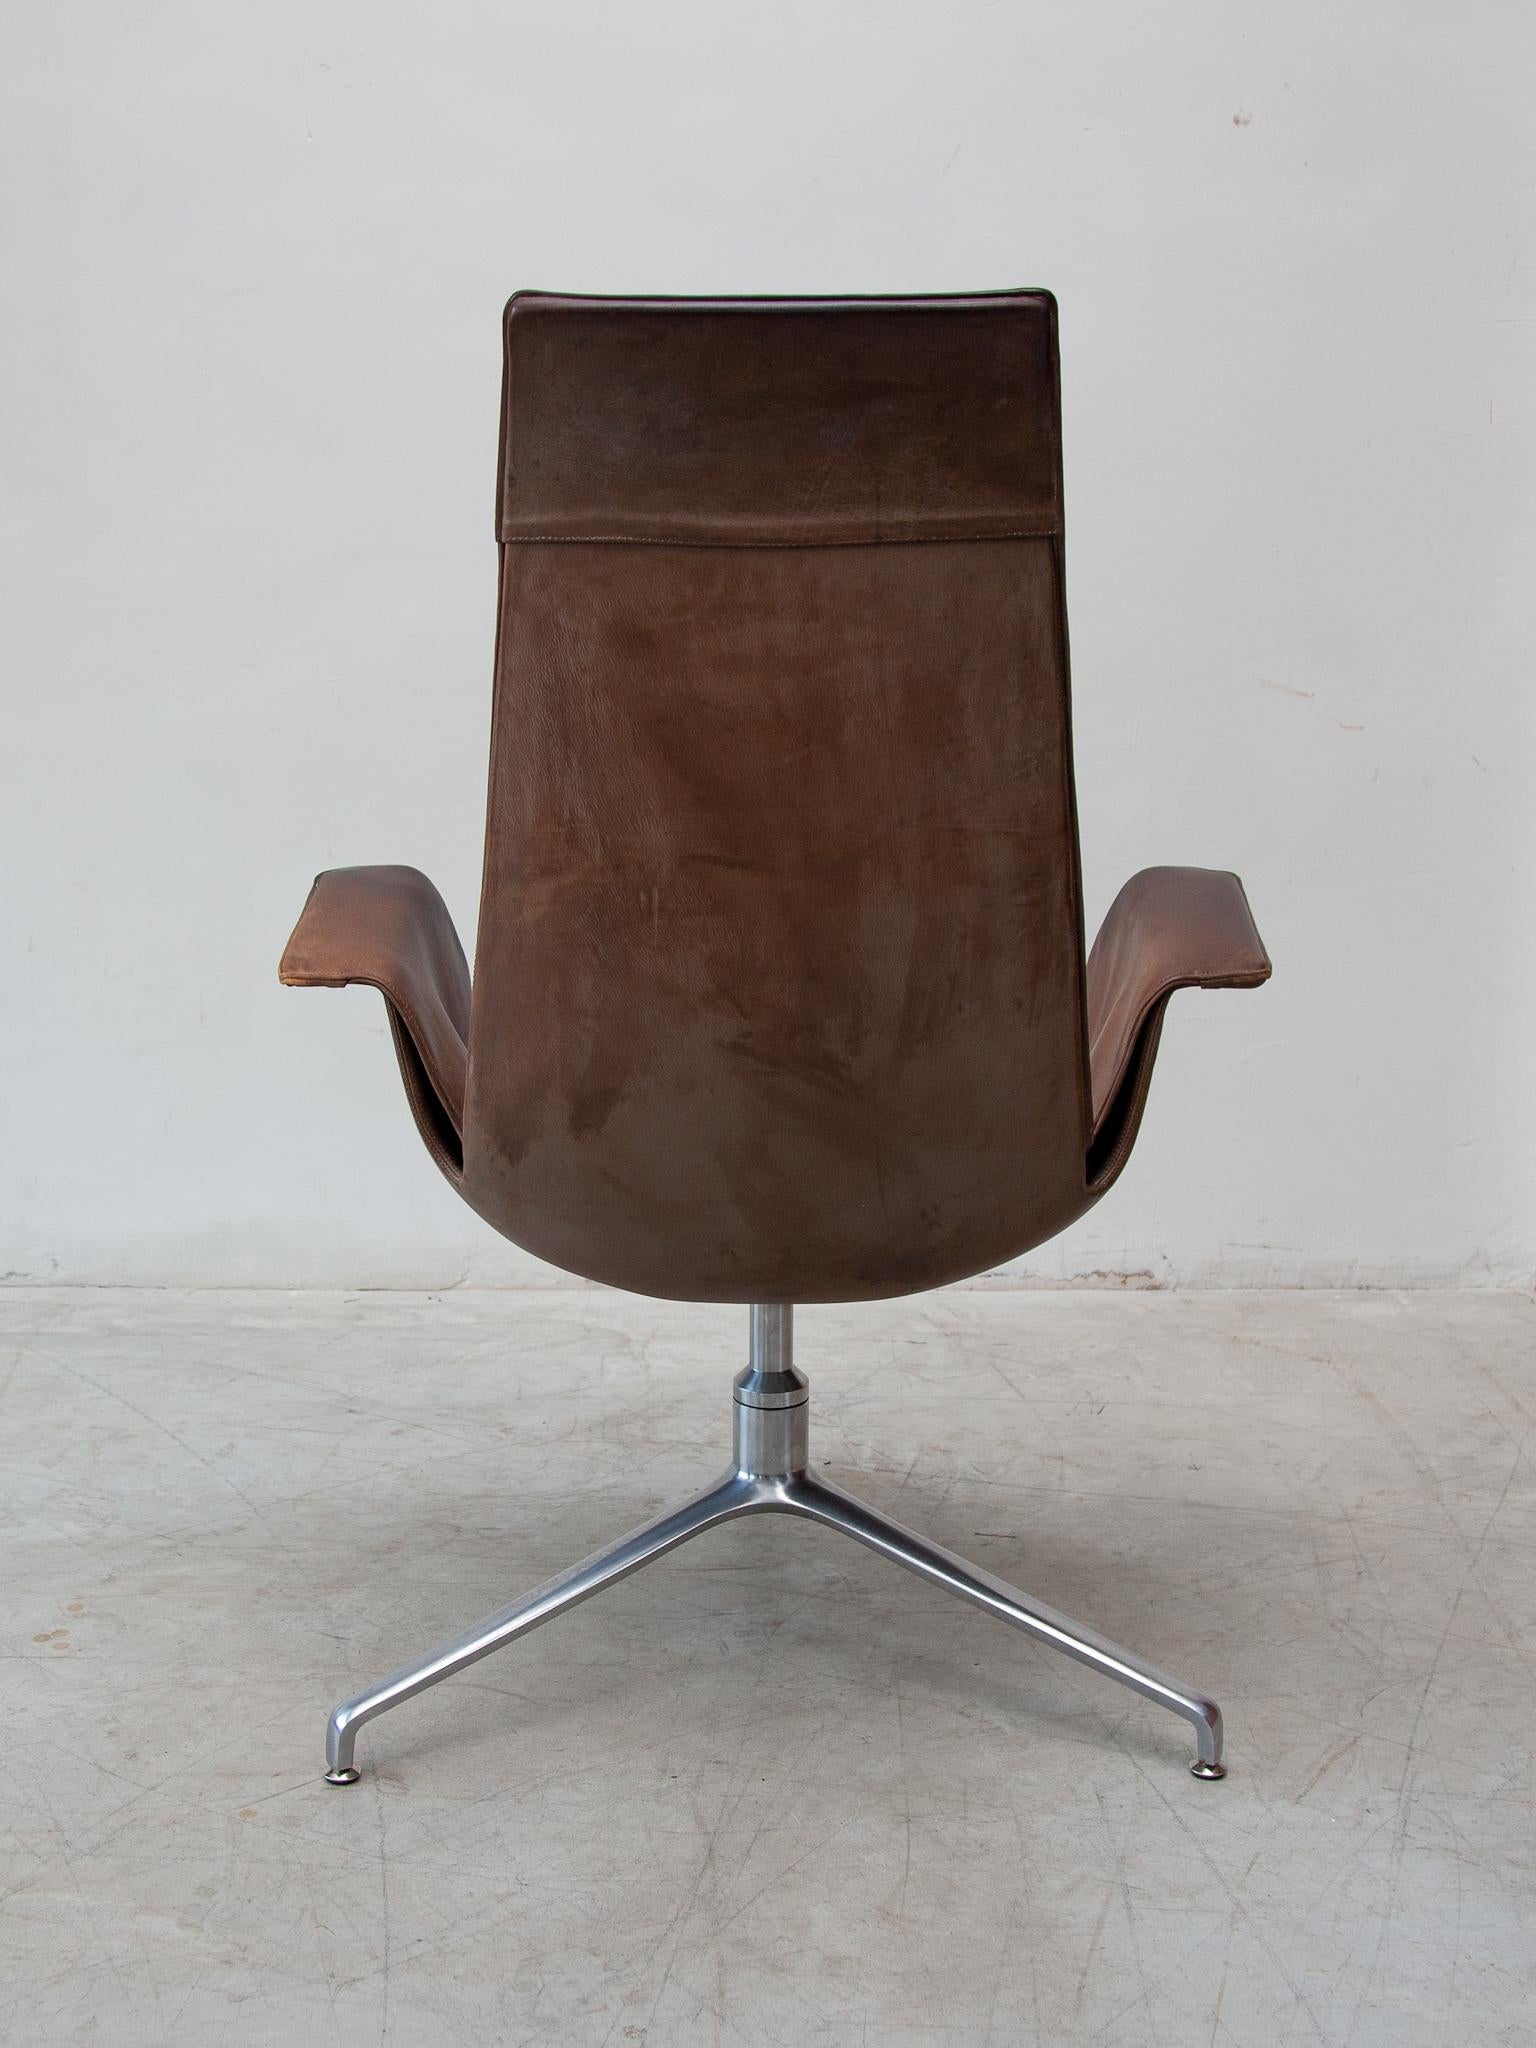 Fabricius & Kastholm FK6725 Desk, Lounge Chair in Brown Leather, Kill For Sale 4